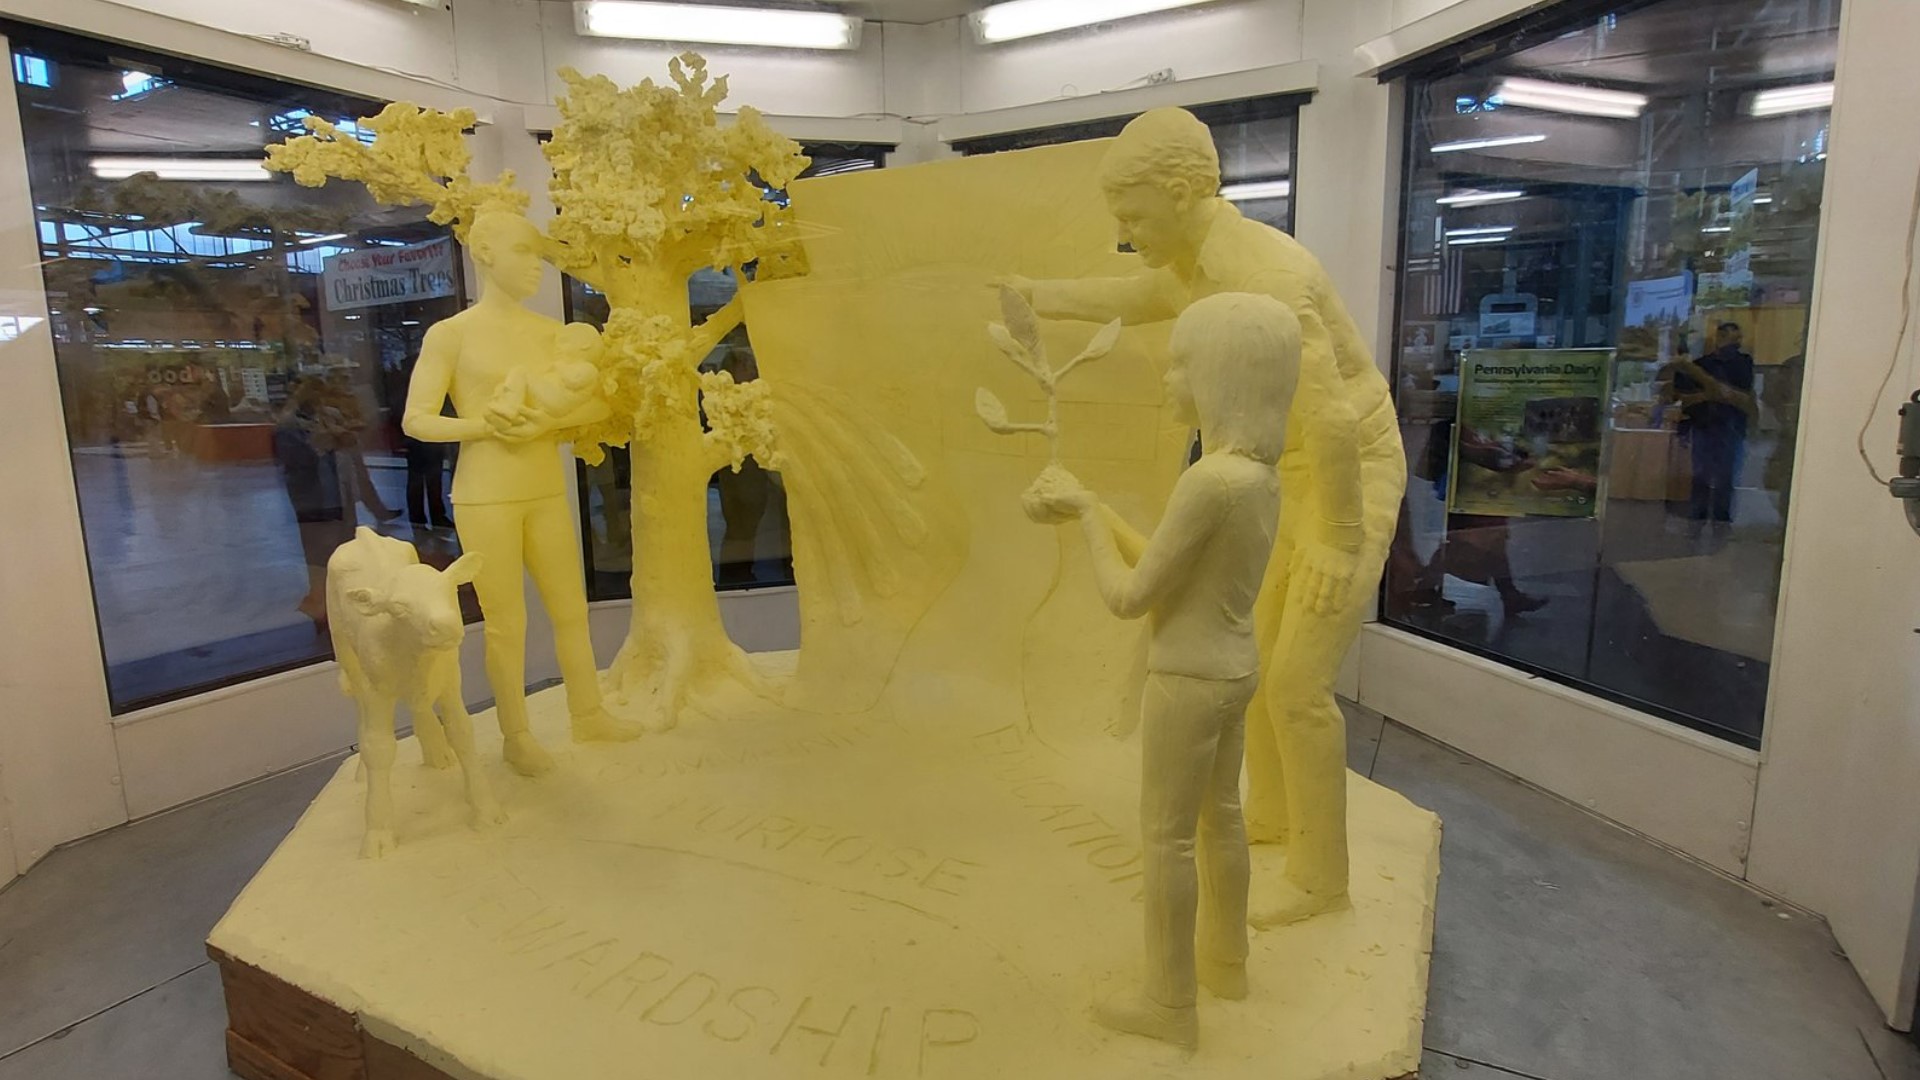 The 32nd Annual Pa. Farm Show Butter Sculpture was unveiled at the Pennsylvania Farm Show Complex at Thursday morning.